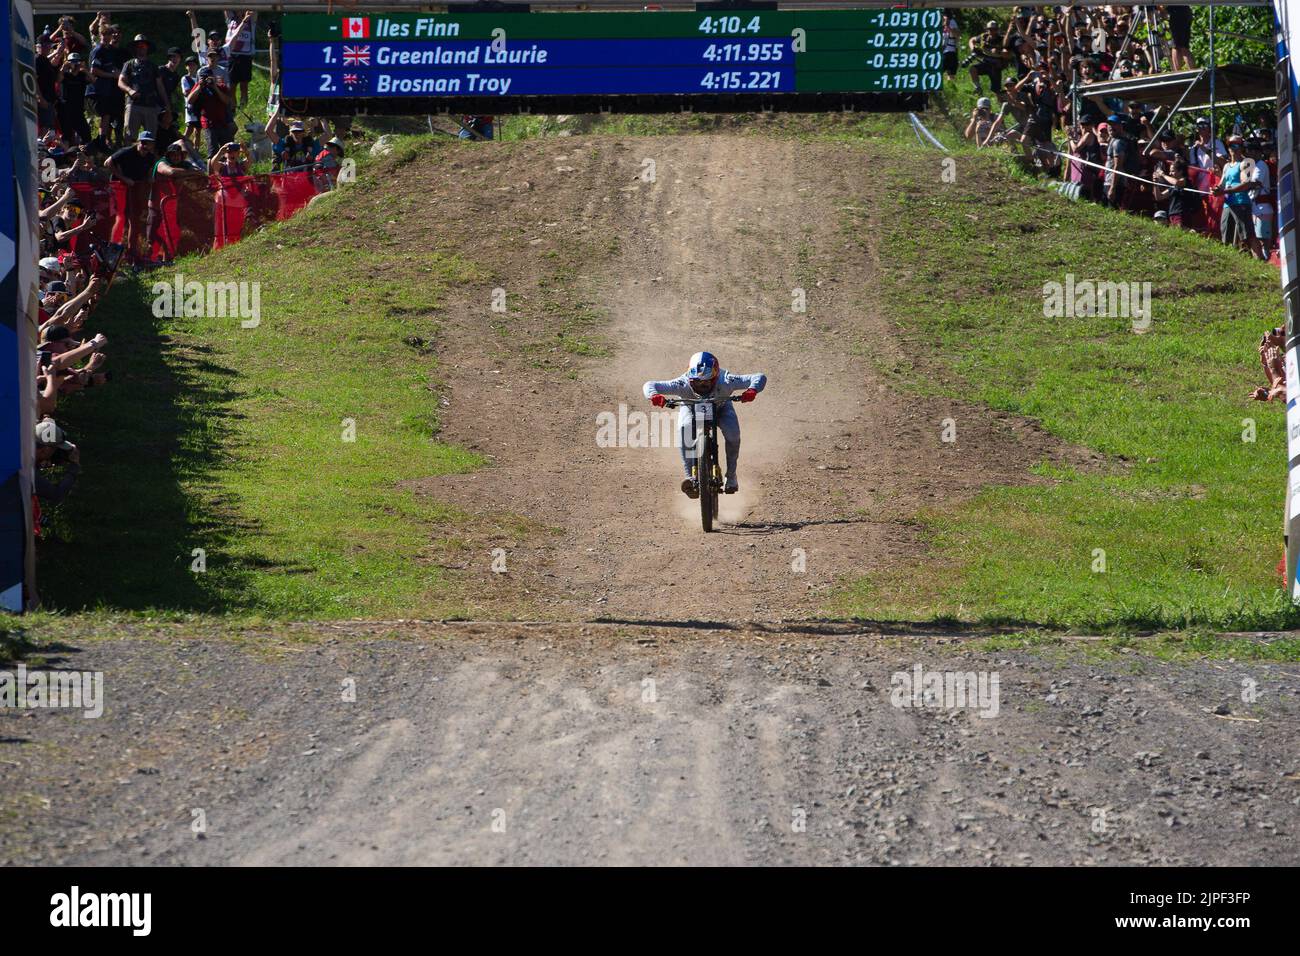 August 06, 2022: Finn Iles of Canada (3) races to the finish line winning the MenÕs Downhill Final during the 2022 Mercedes-Benz UCI Mountain Bike World Cup held at Mont-Sainte-Anne in Beaupre, Quebec, Canada. Daniel Lea/CSM Stock Photo